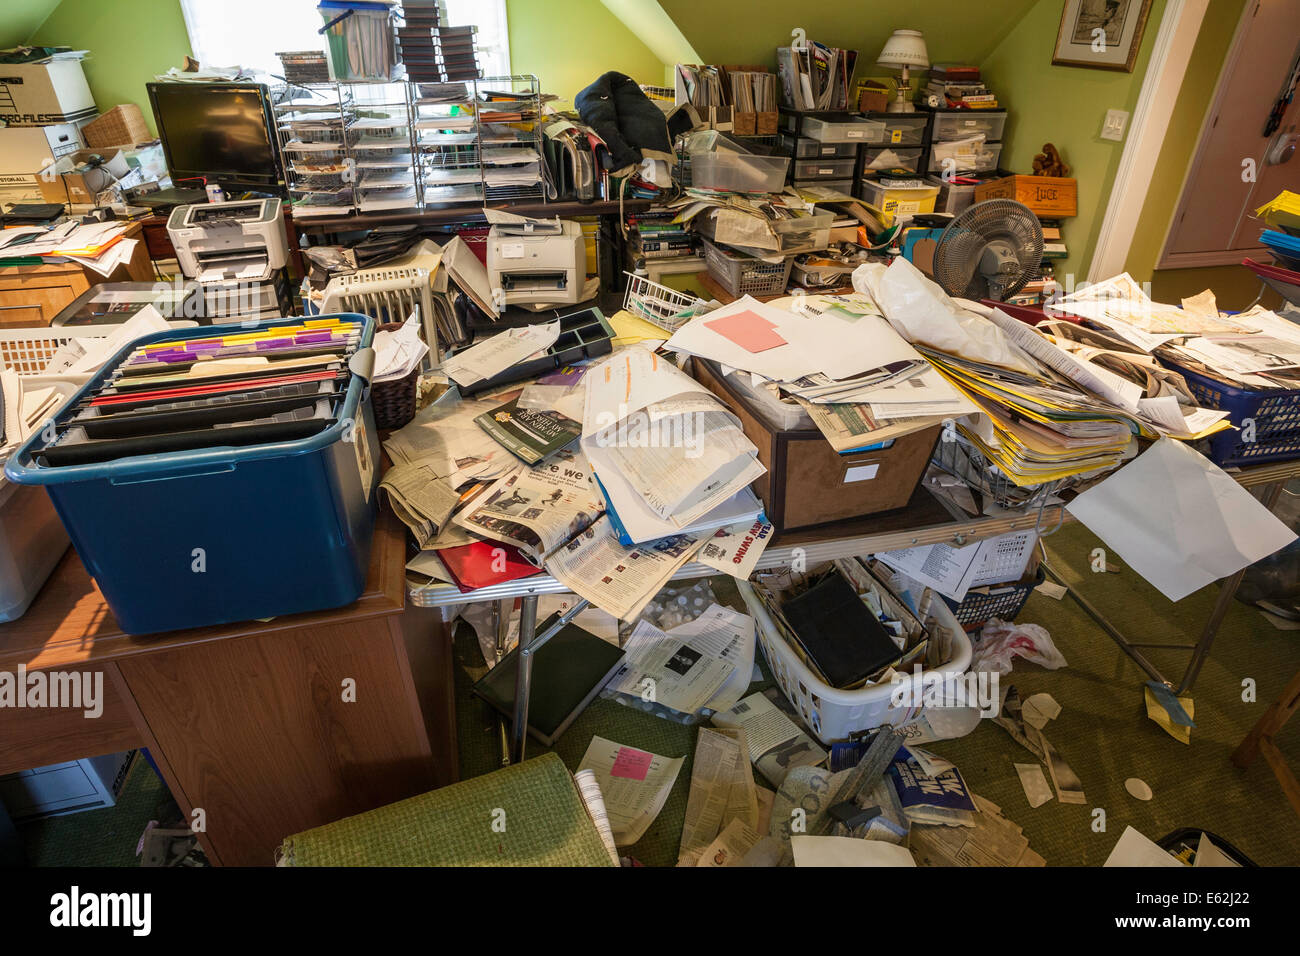 Hoarders' Messy Home Office, residential home, USA Stock Photo - Alamy